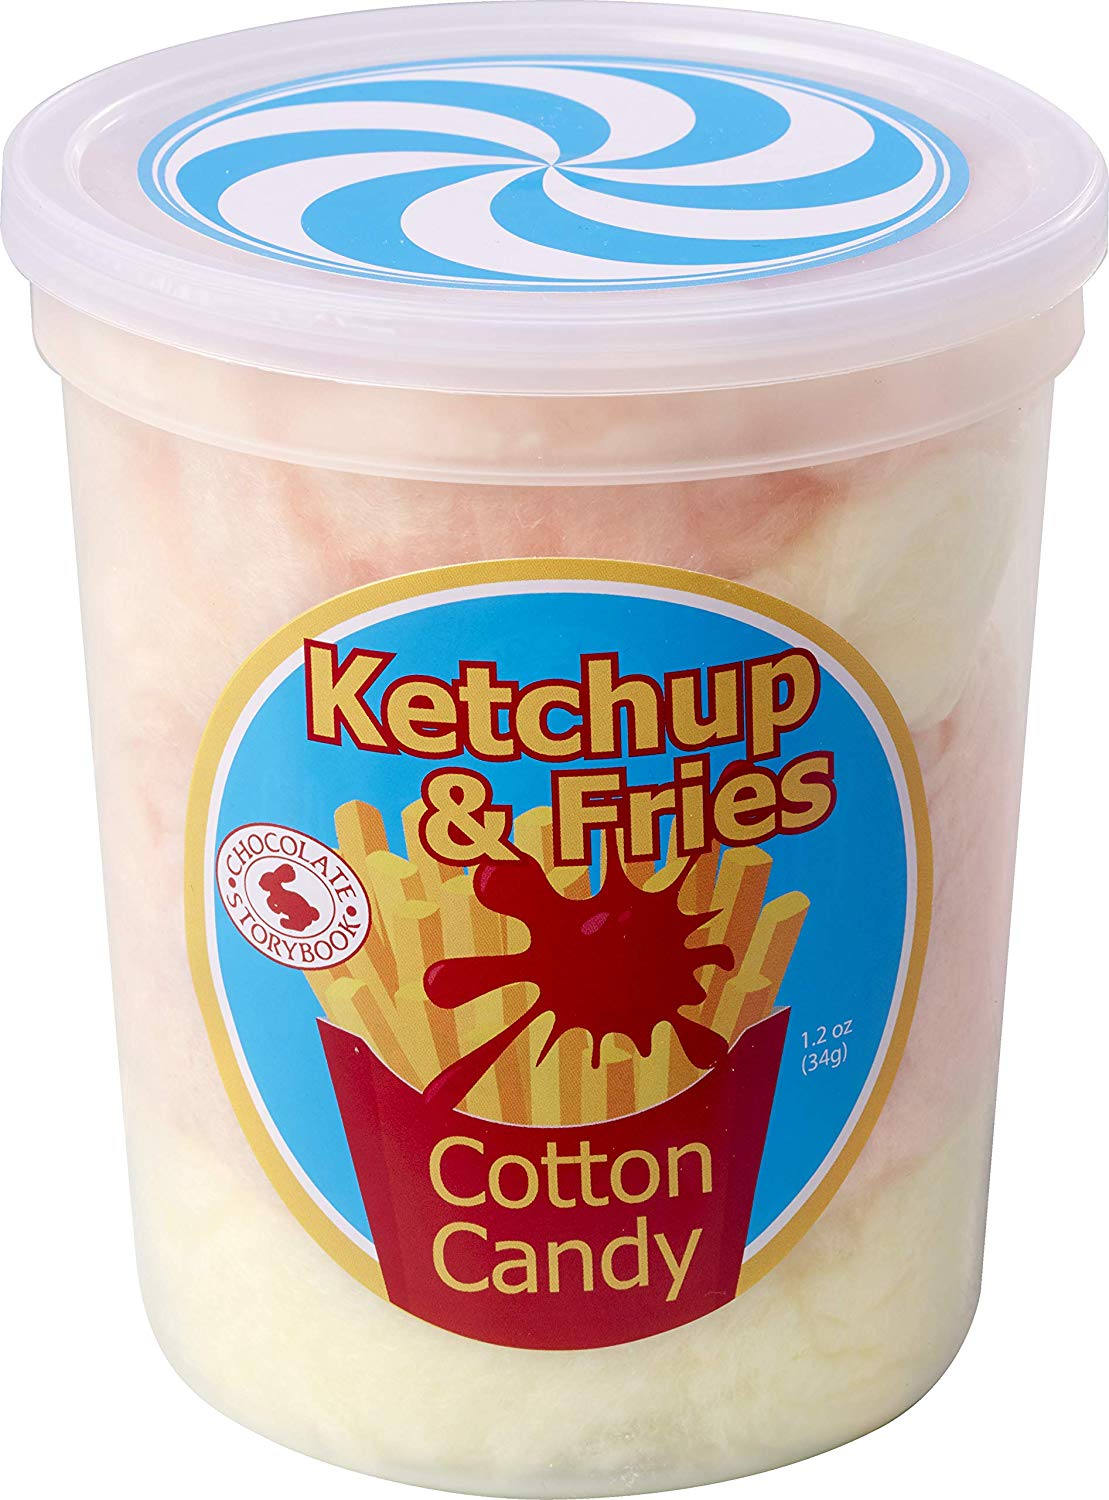 Ketchup and Fries Gourmet Flavored Cotton Candy